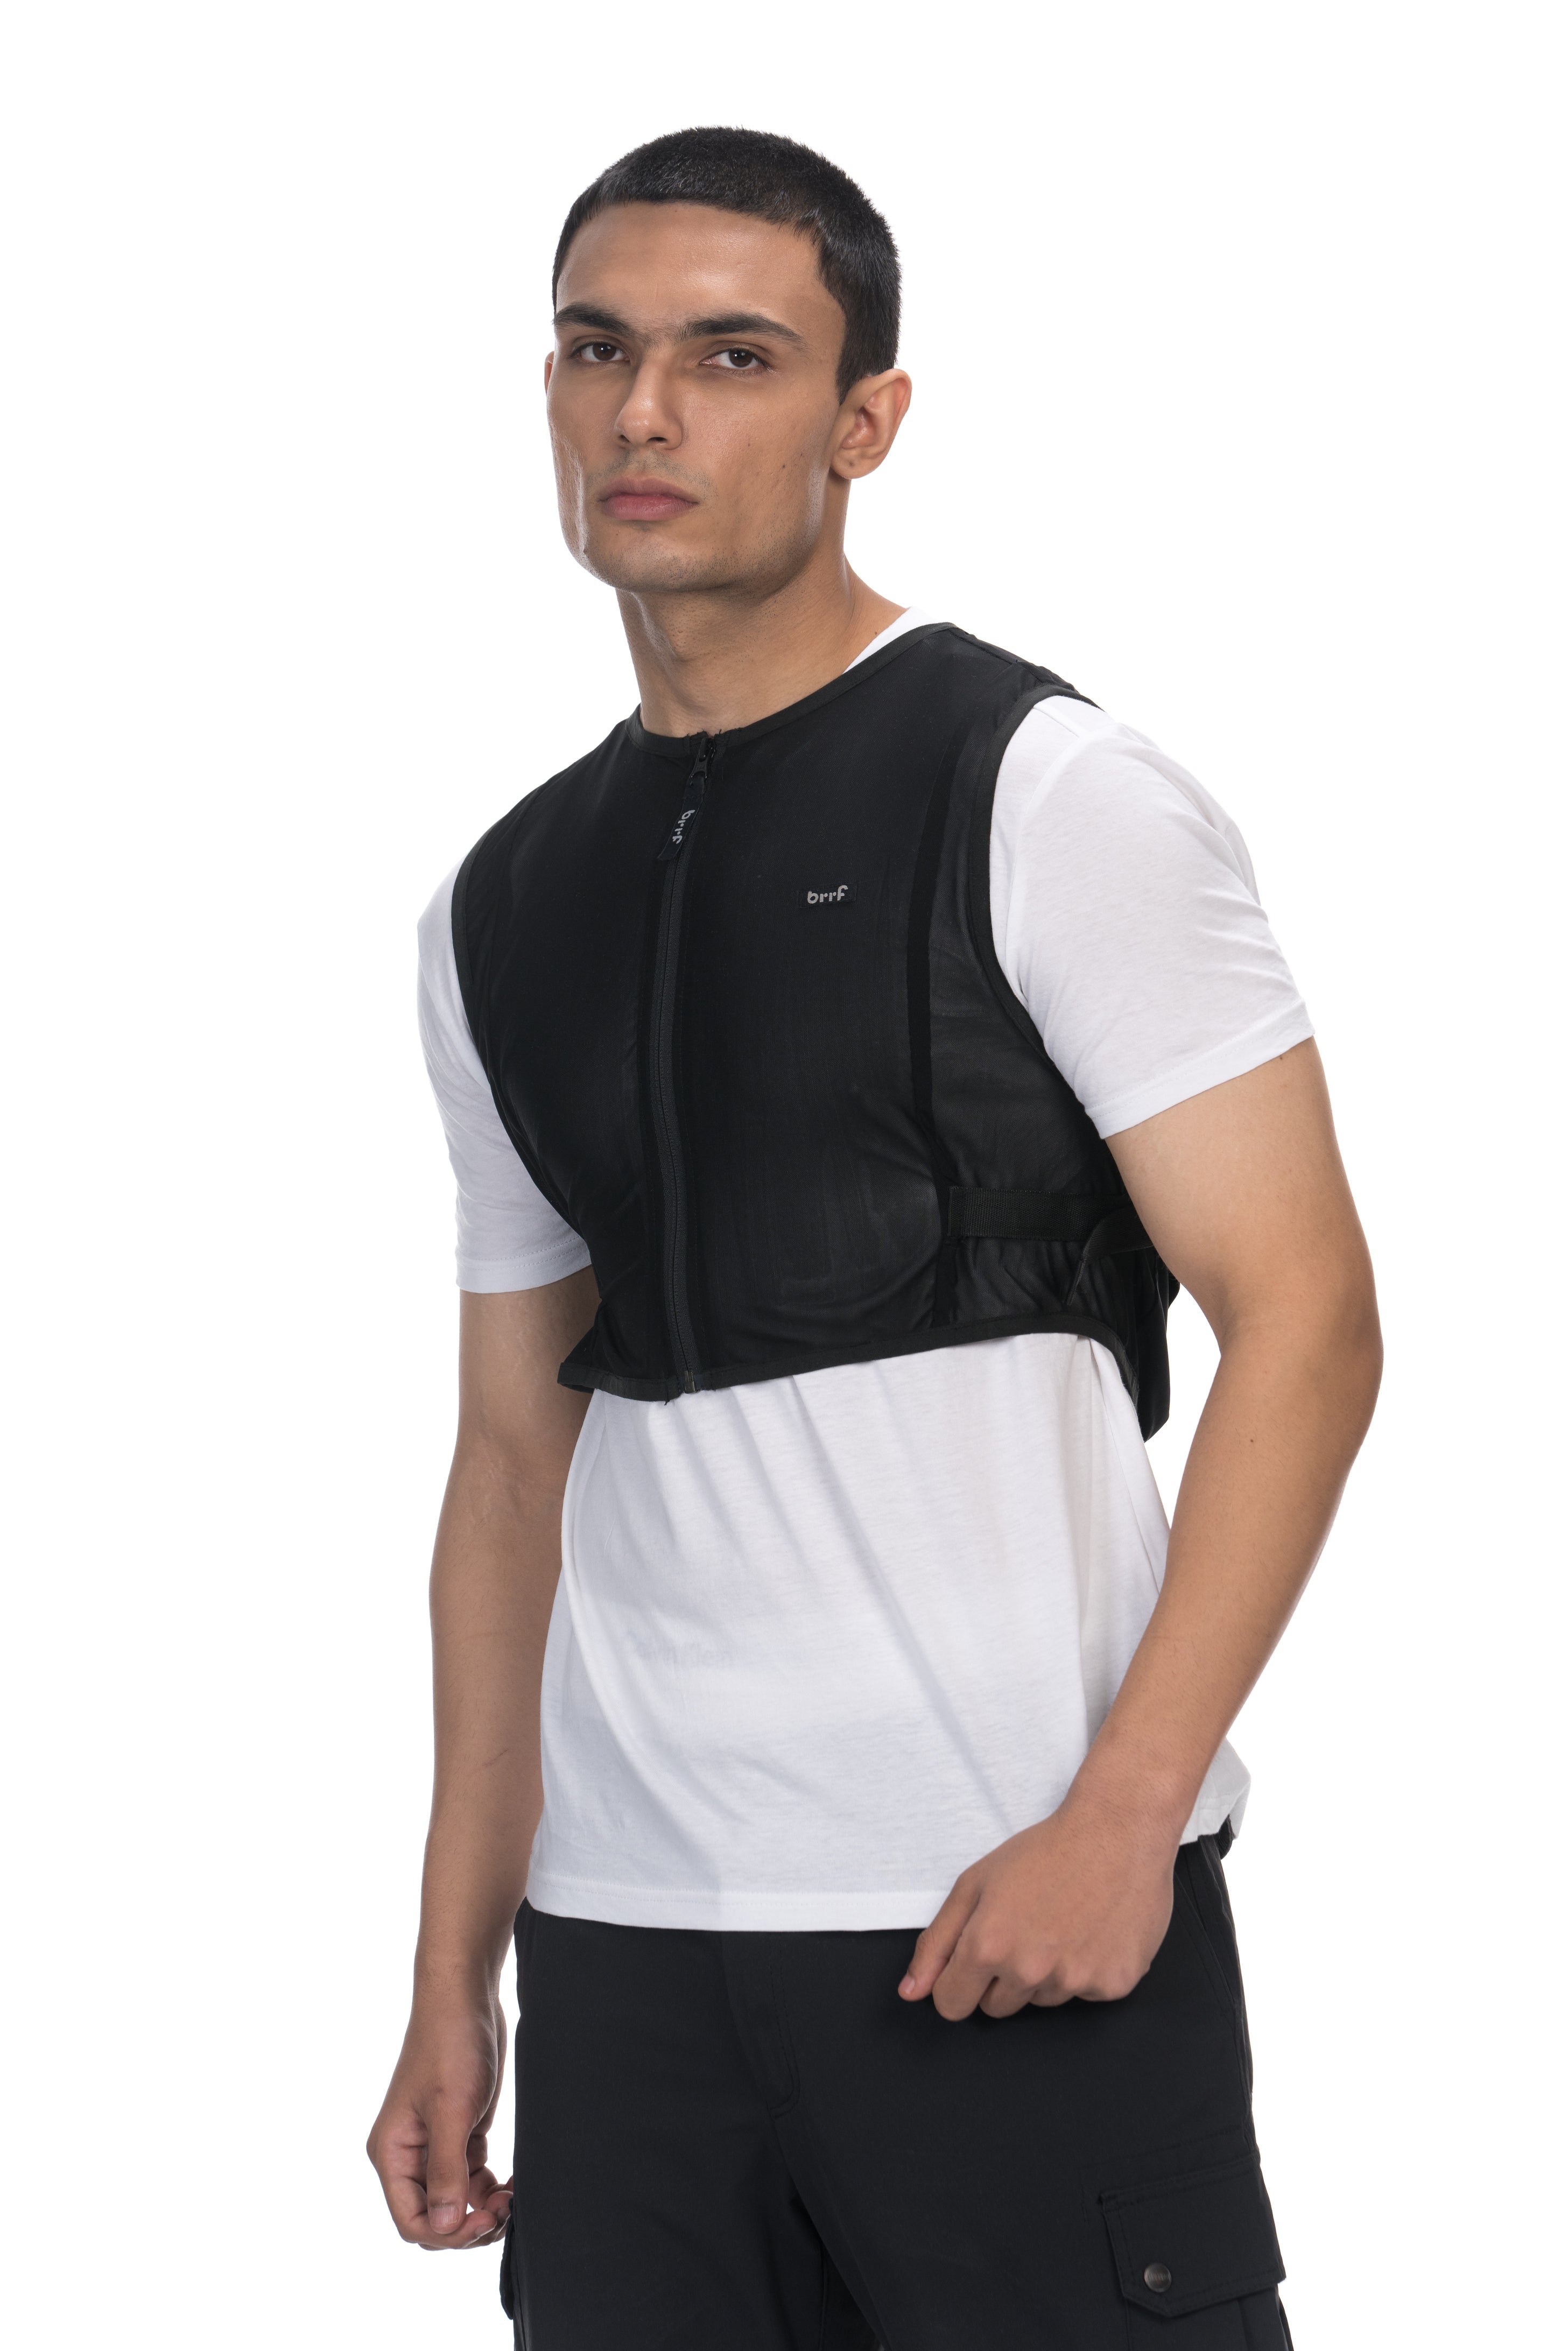 PCM Cooling Vest - Maintains Temperature of 22-24 Degrees for upto 2.5 Hours